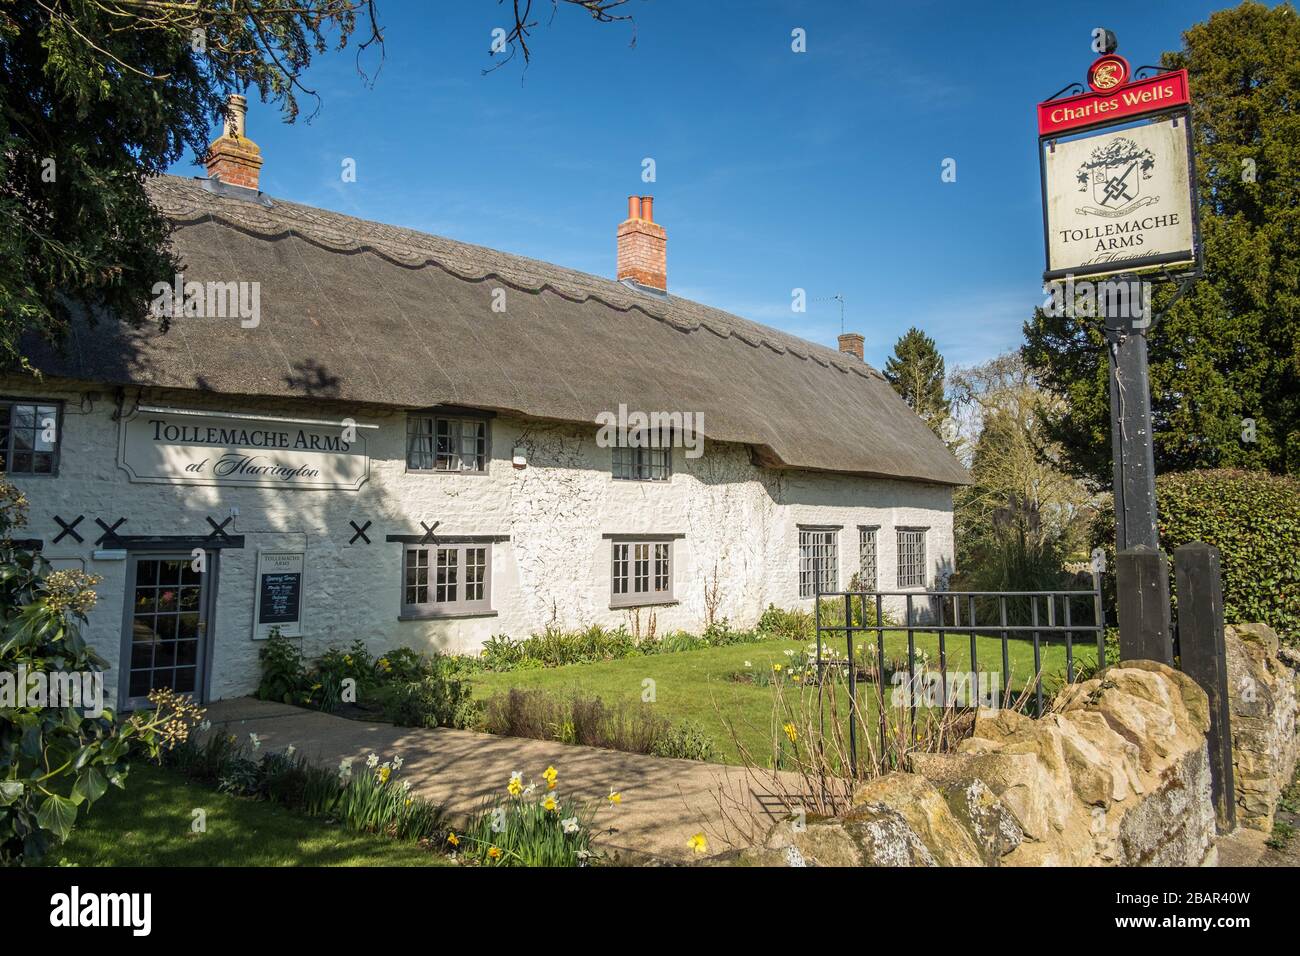 The Tollemache pub in Harrington Northamptonshire UK. One of the many pubs closed during the Coronavirus (Covid19) outbreak. Stock Photo